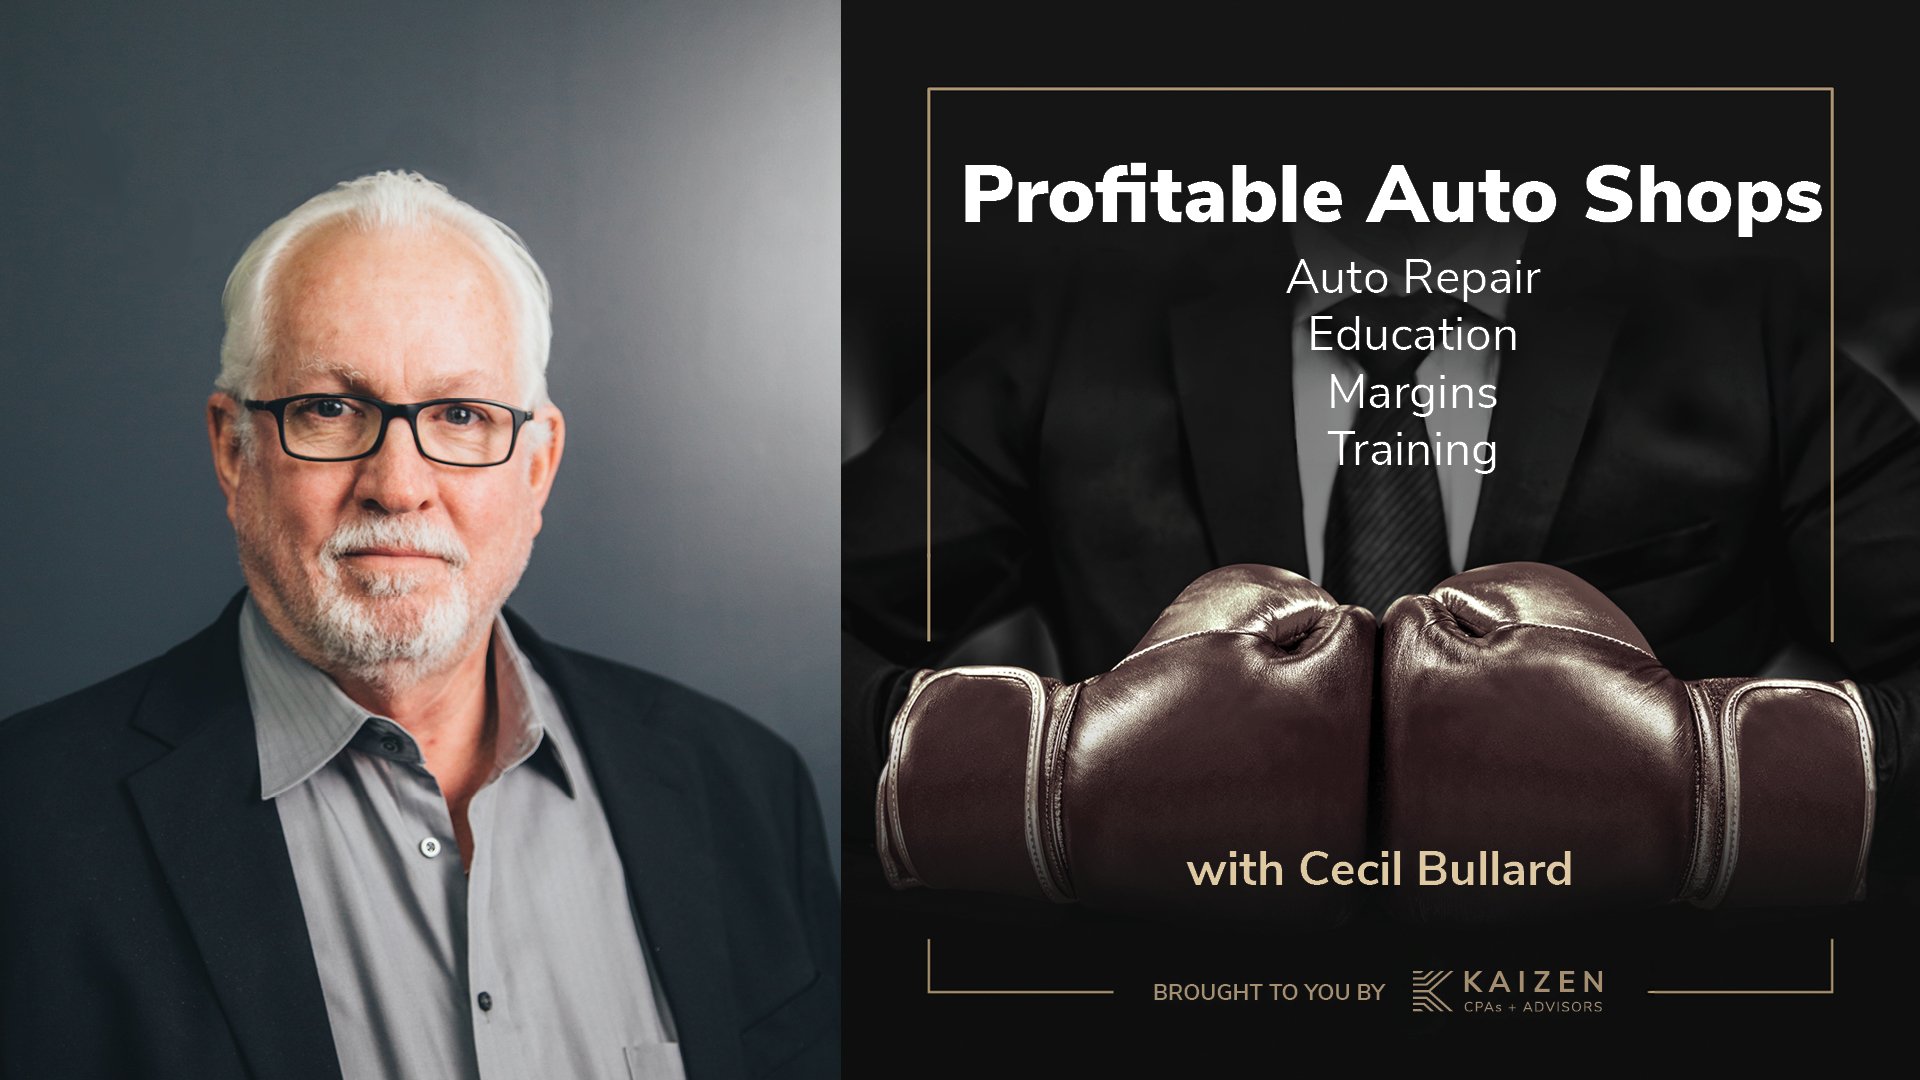 Cecil Bullard shares his evolution from a mechanic to an industry consultant, tackling profitability challenges in the automotive sector.